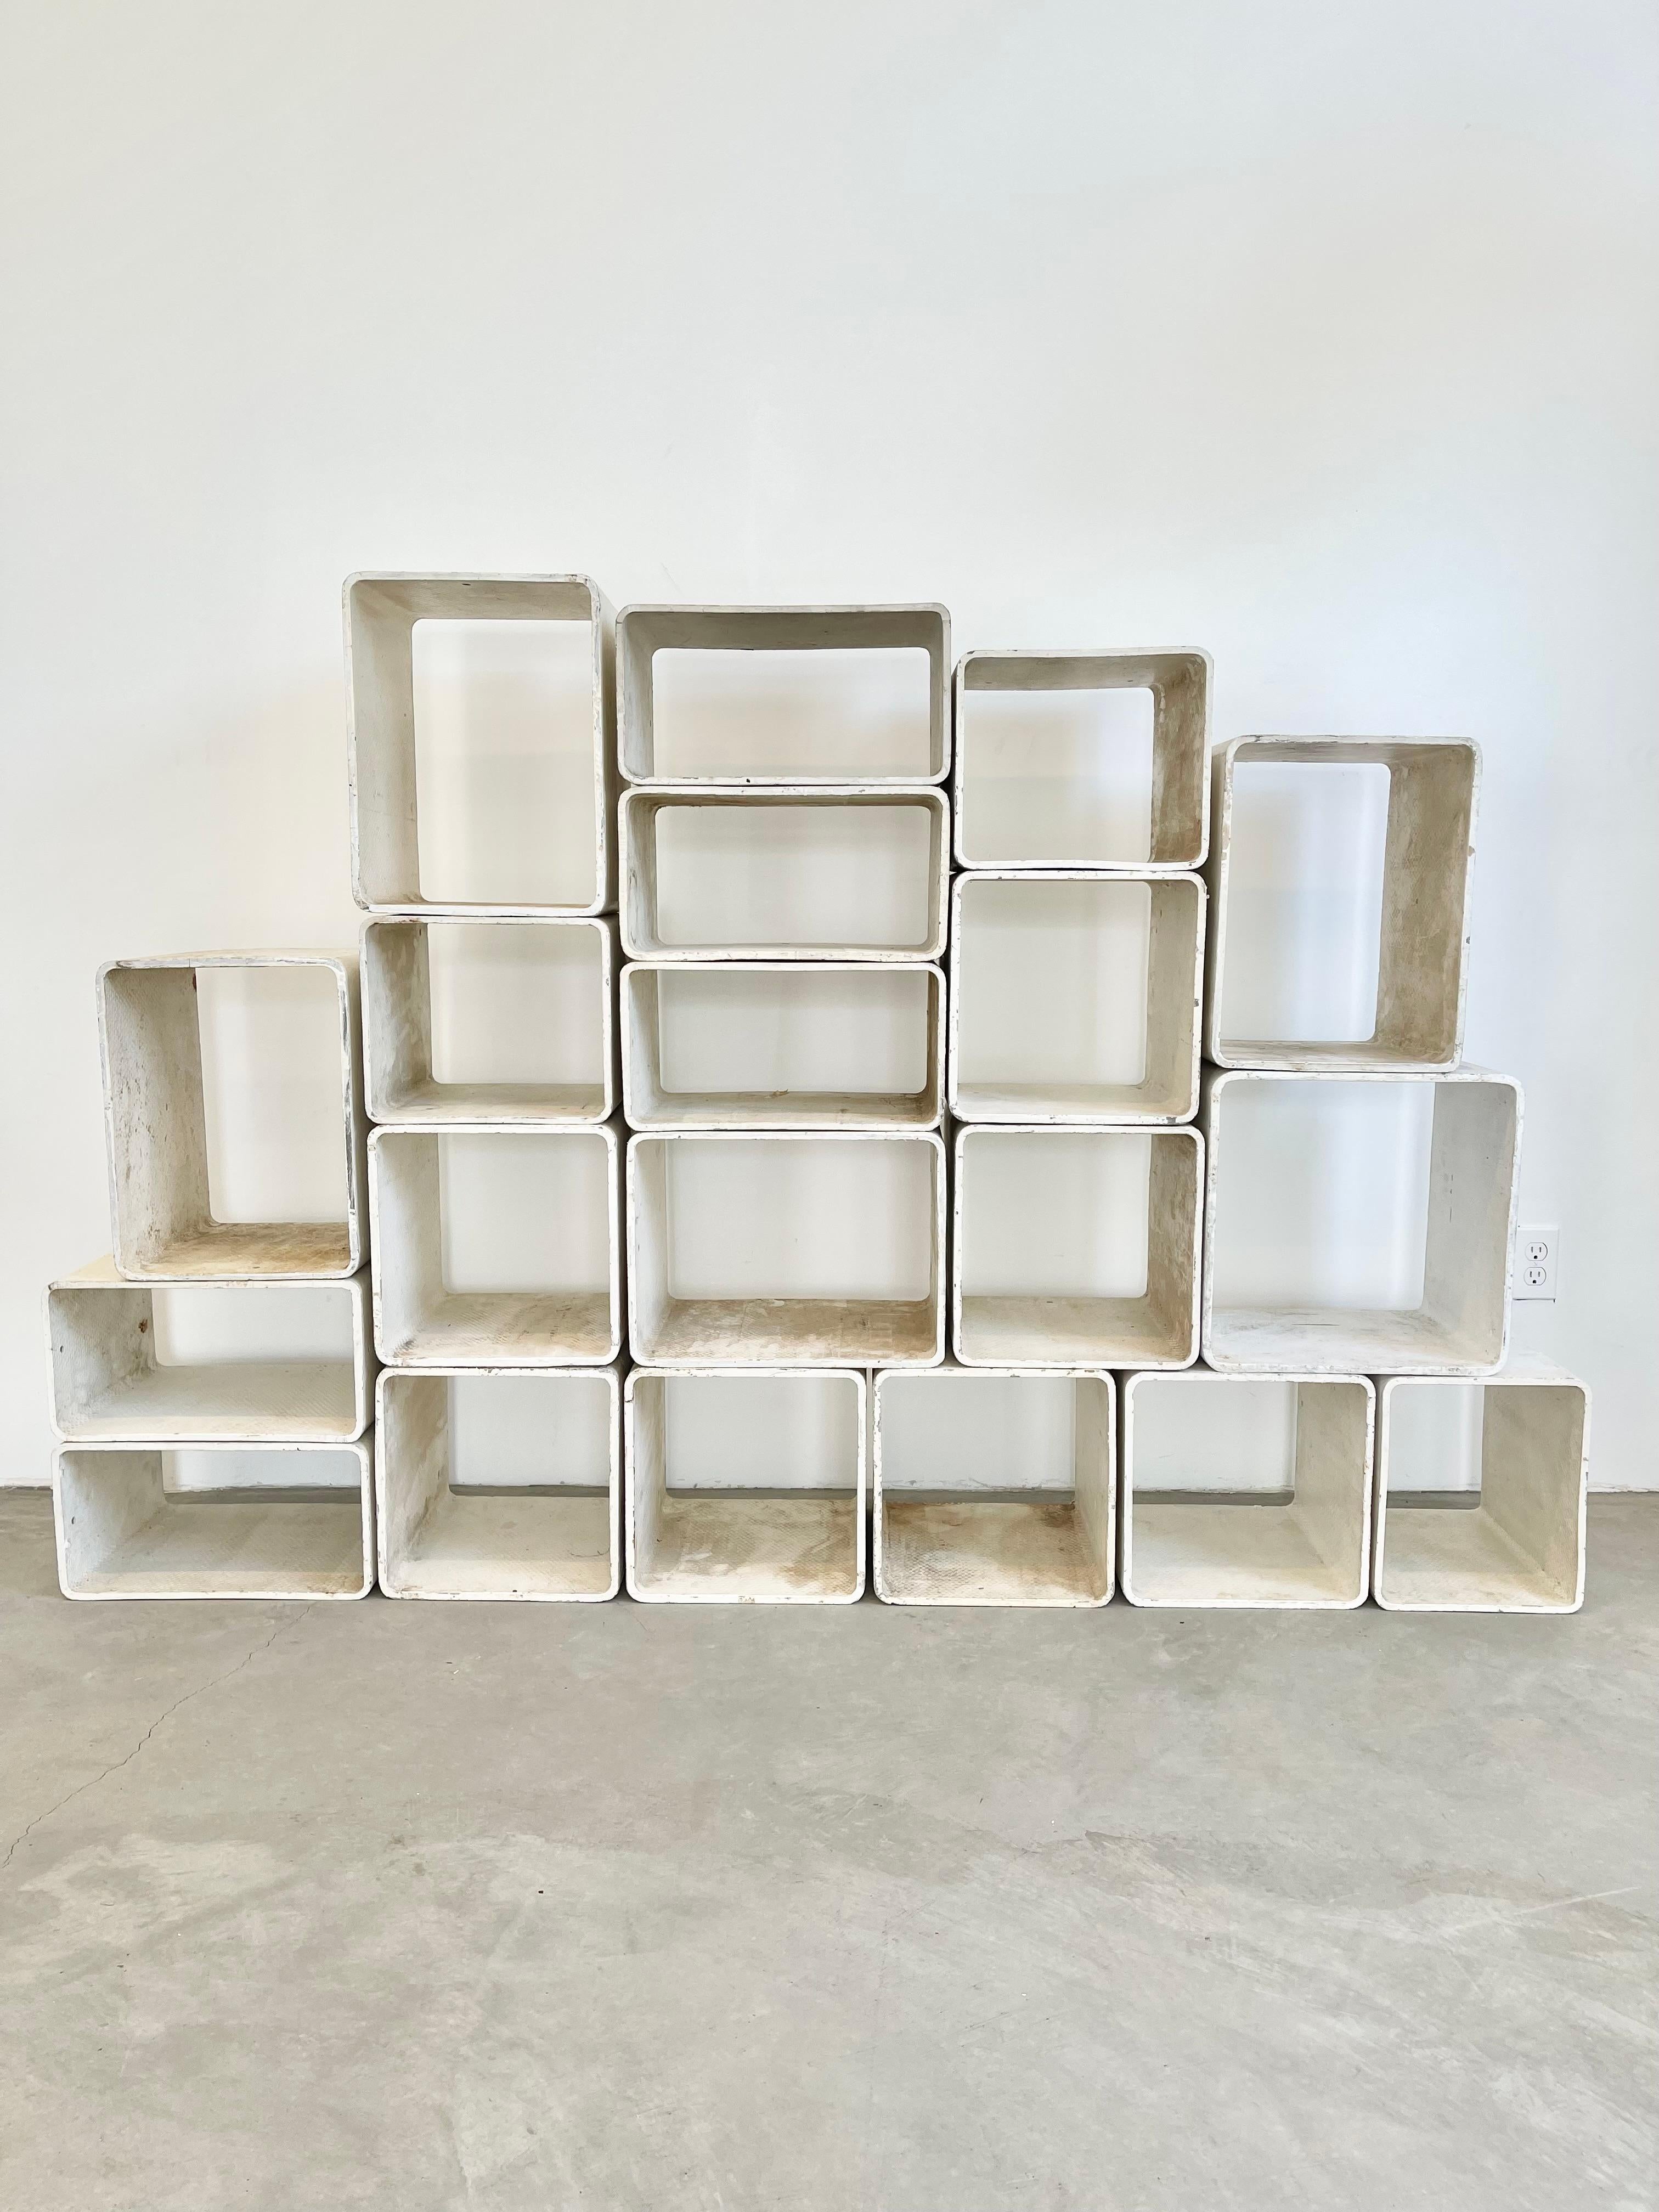 Stunning sculptural set of painted concrete cubes by Swiss architect Willy Guhl. Handmade in the early 1960s in Switzerland and all painted in a soft cream color. Produced by Eternit. Can be arranged in a multitude of ways. Perfect bookcase, room